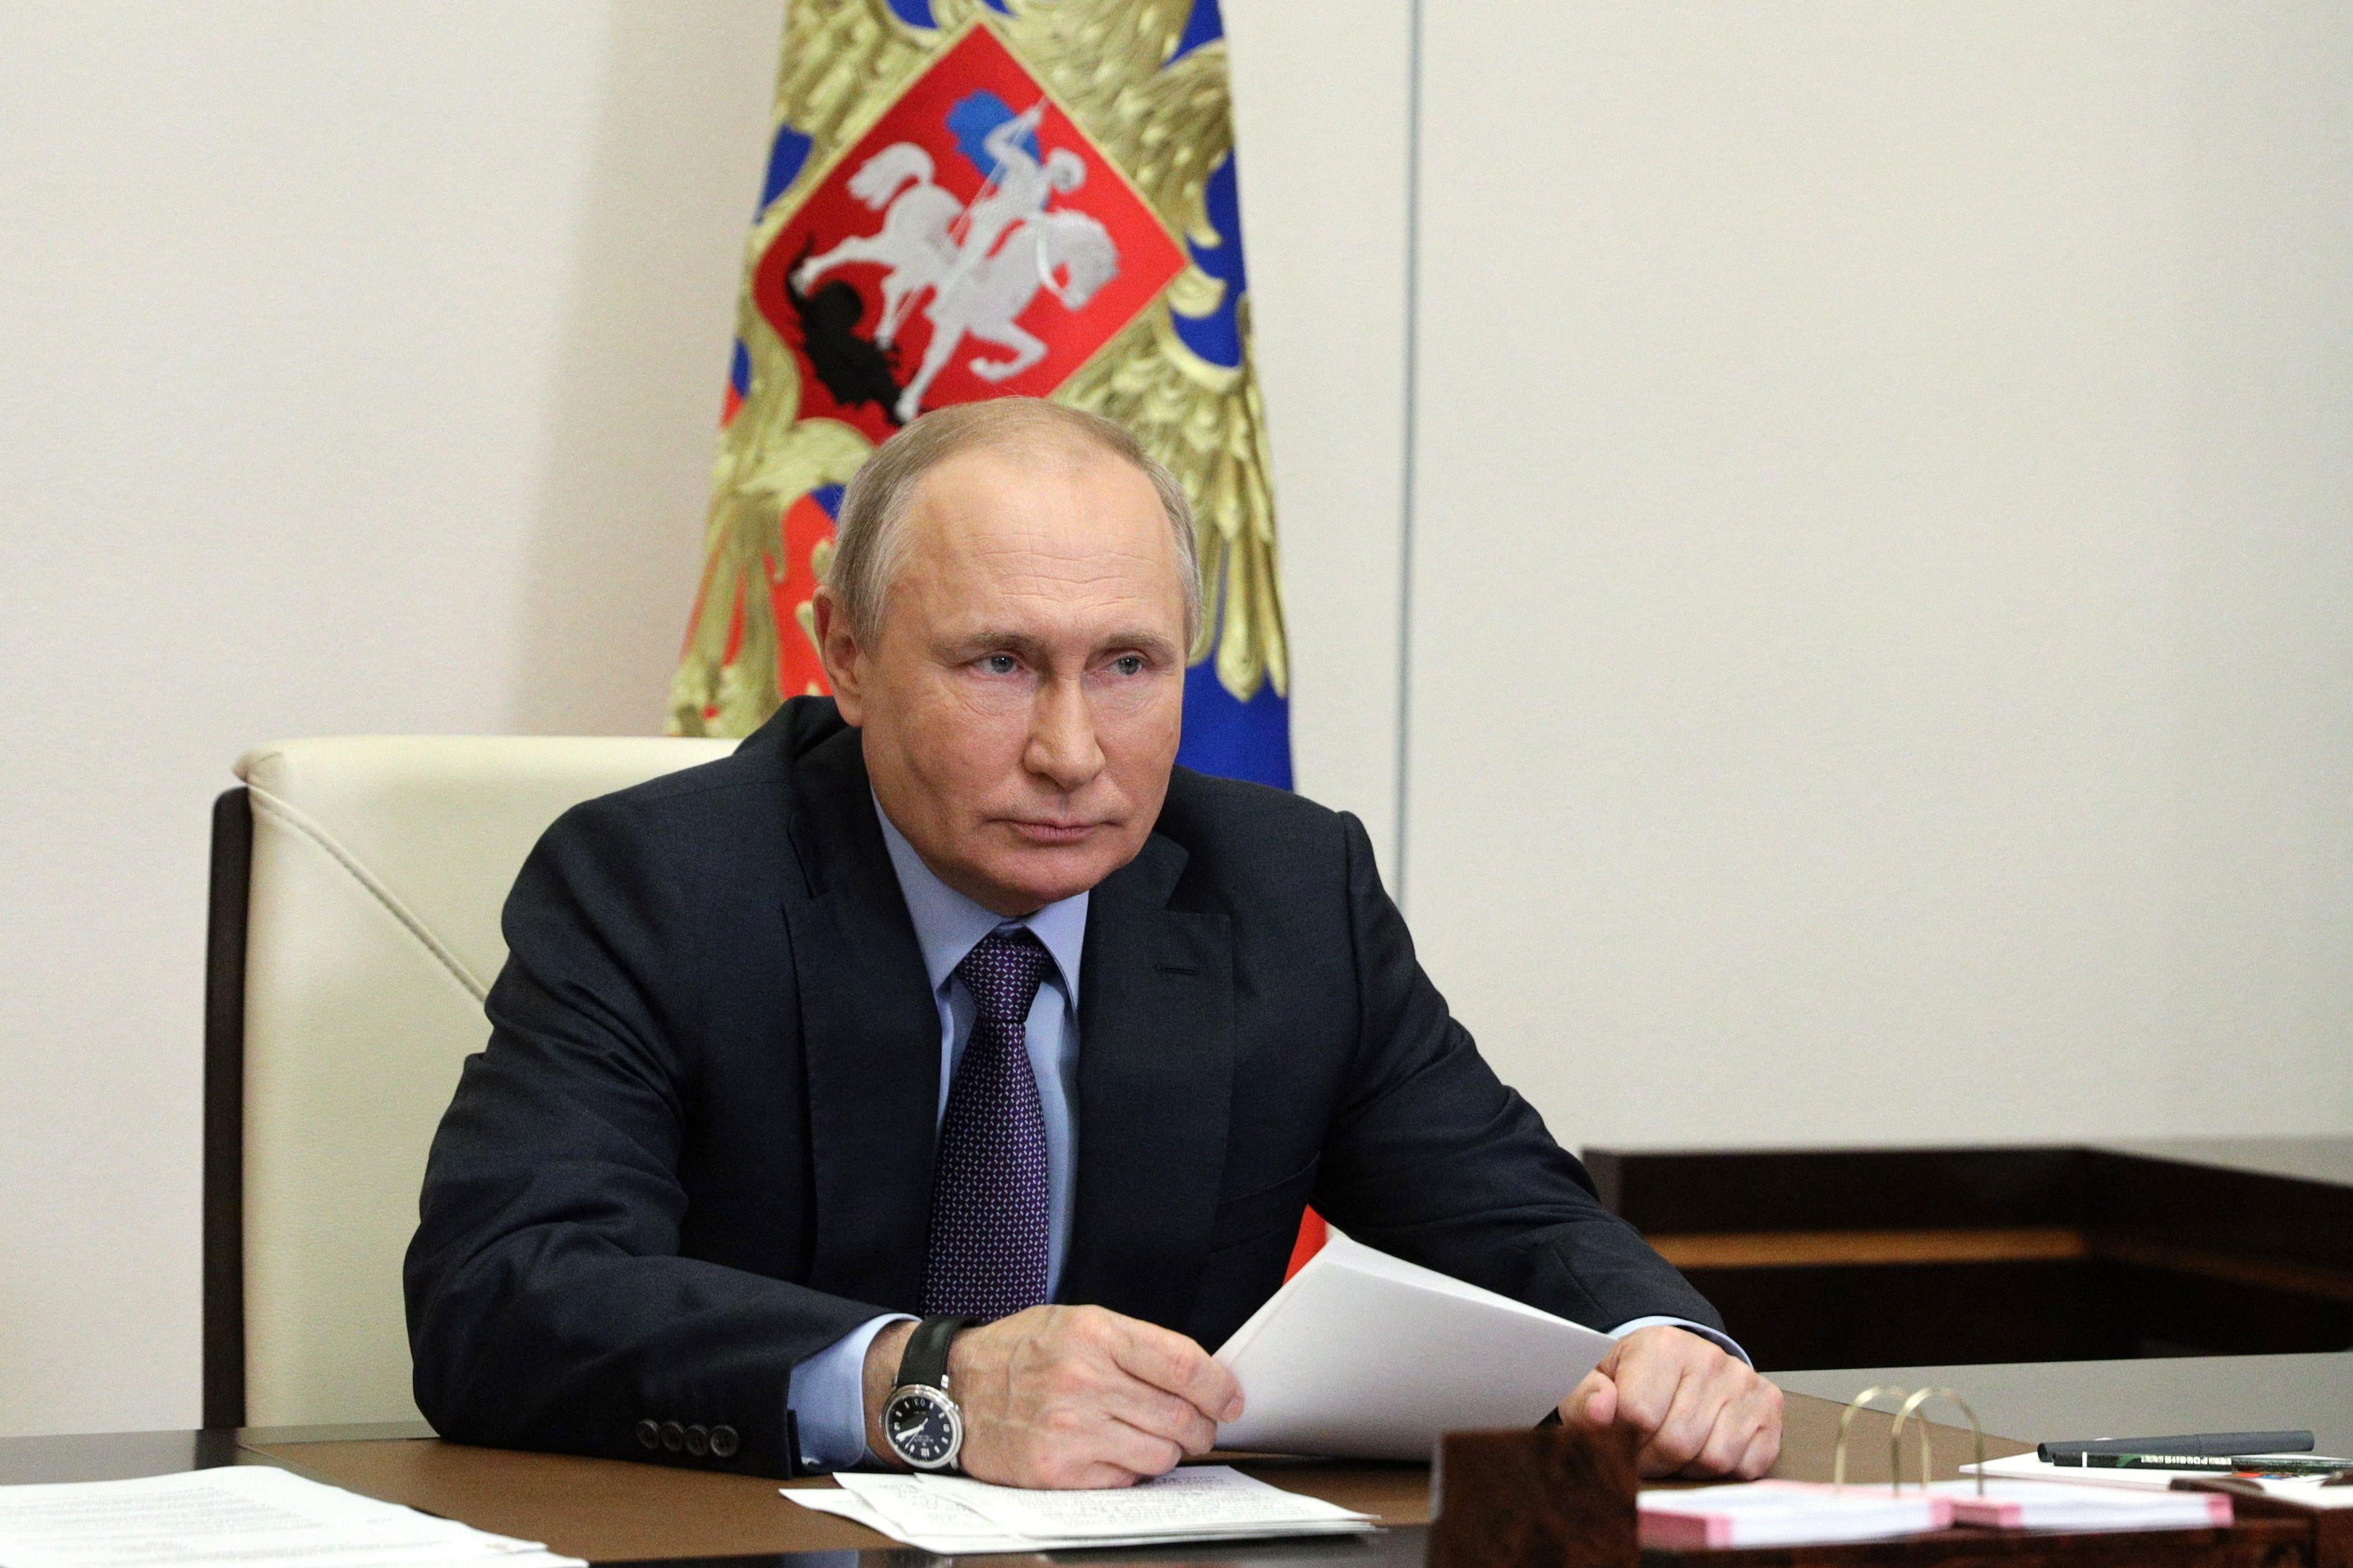 Vladimir Putin sits at a table holding a piece of paper, with a flag behind him.